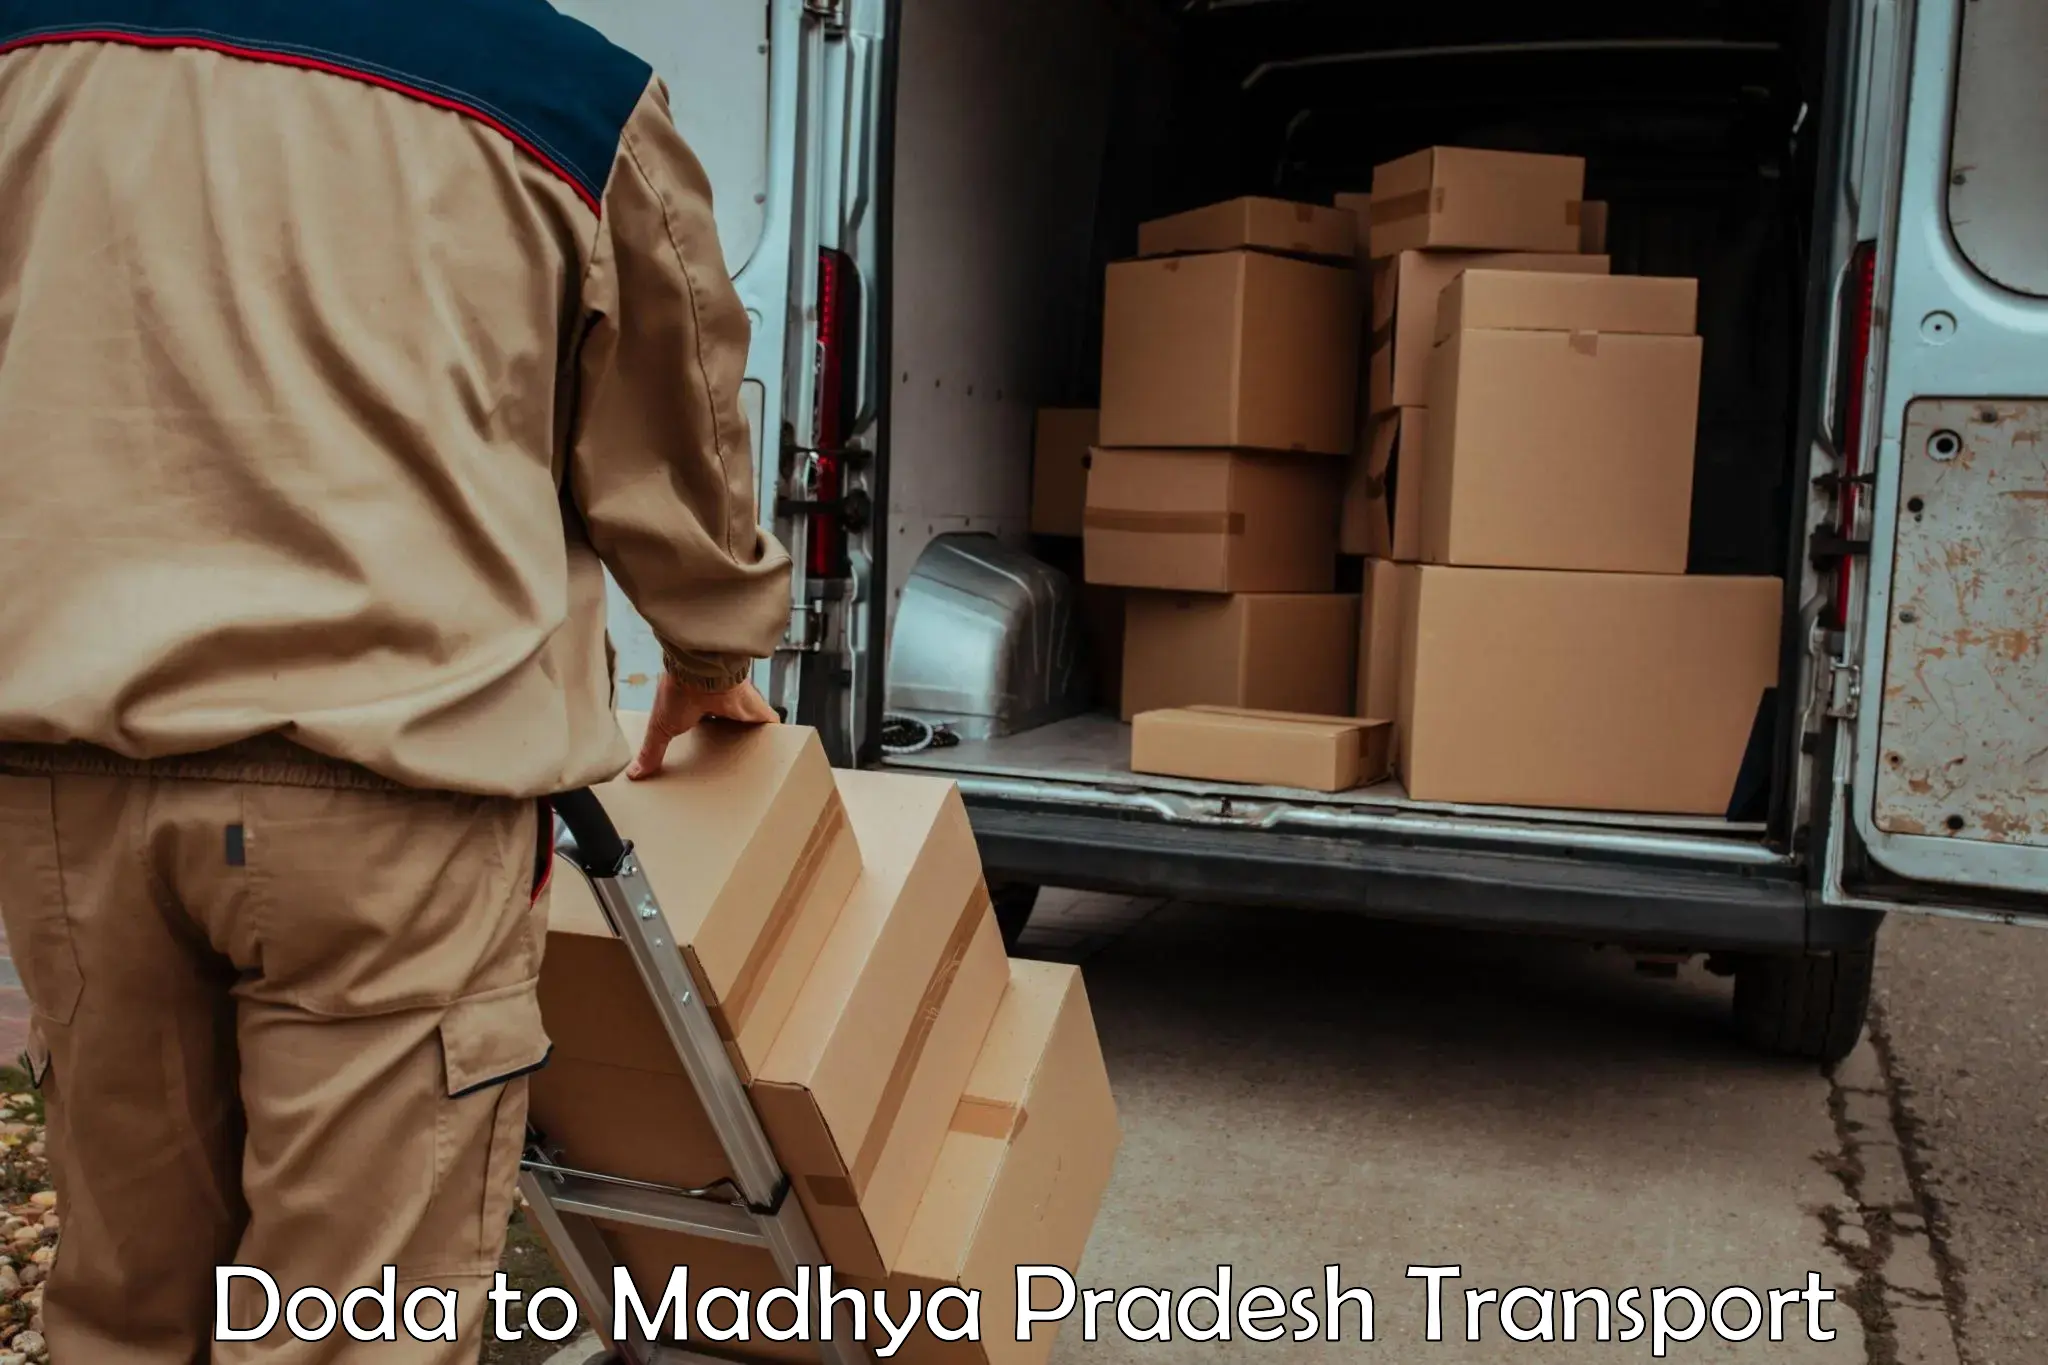 Domestic goods transportation services Doda to Neemuch